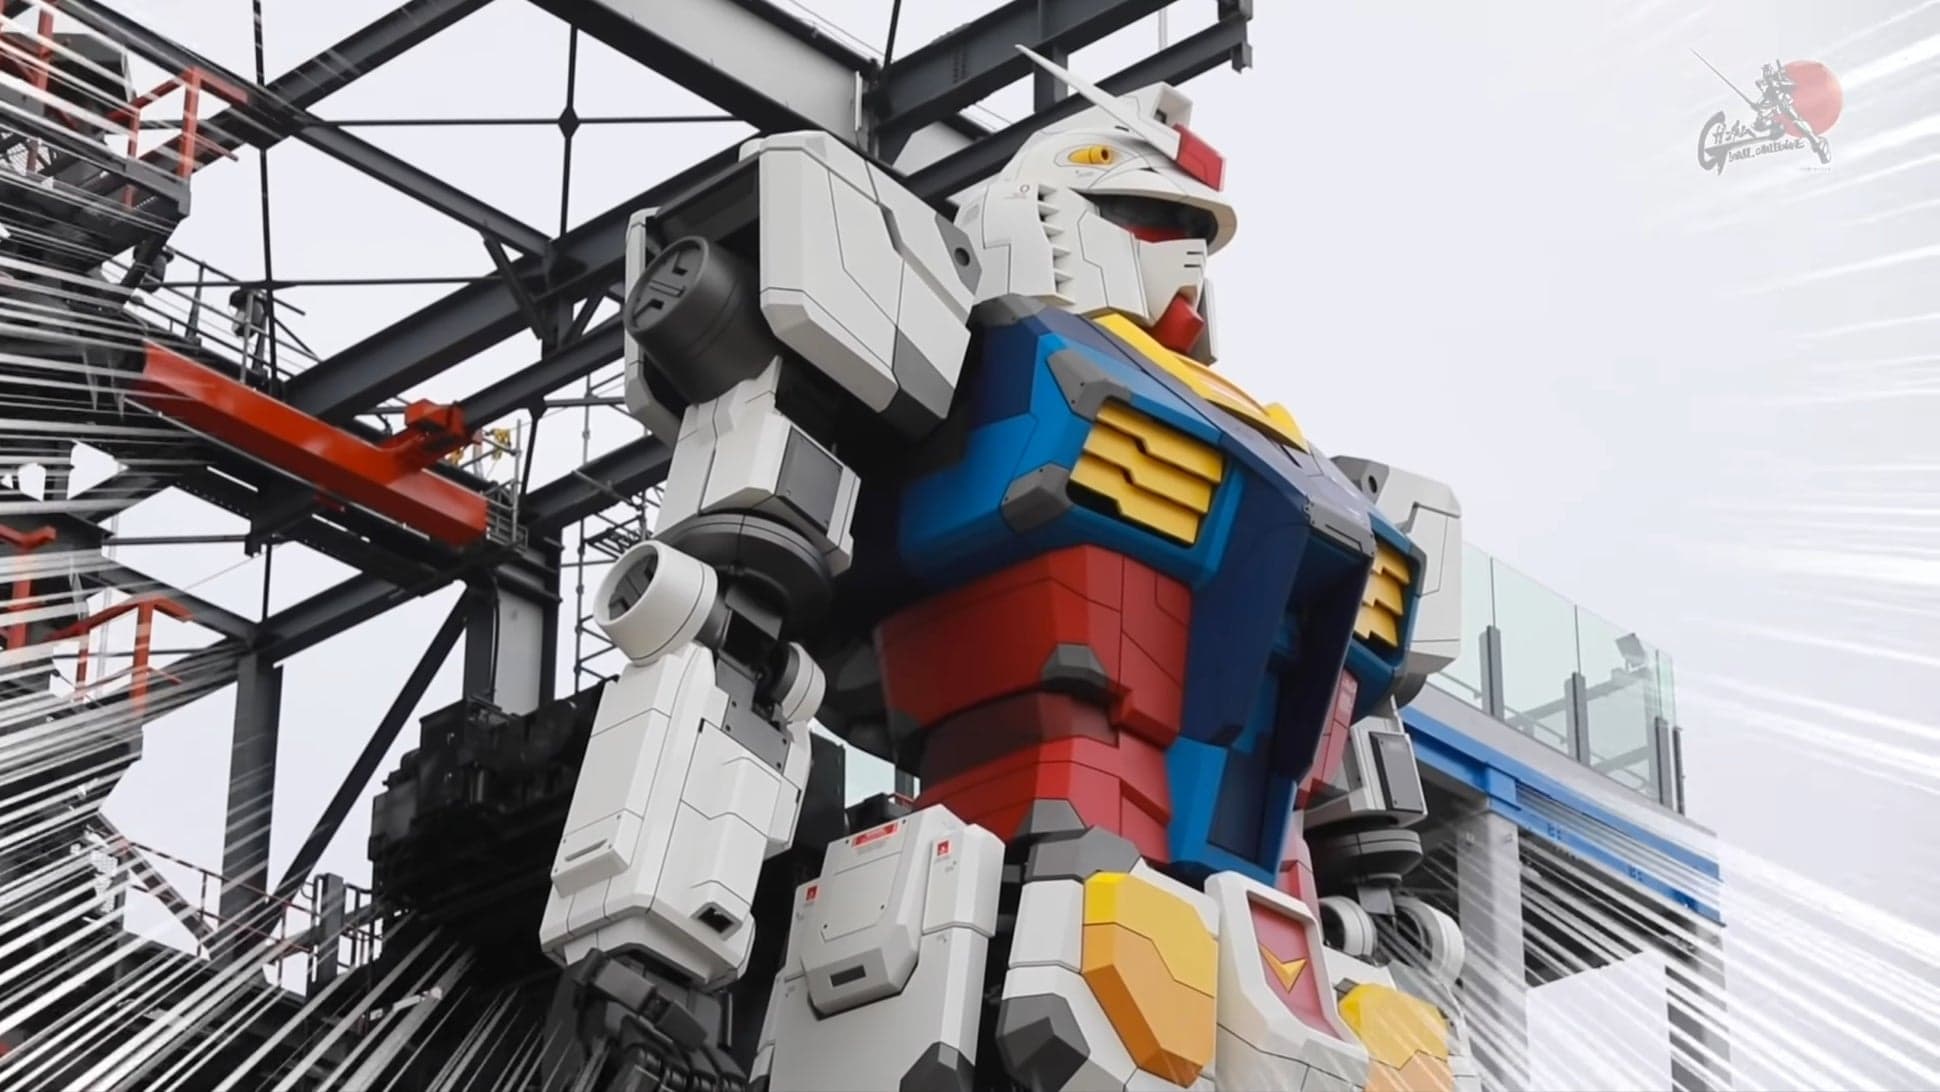 I Will Remain Disappointed In Japan’s Life-Sized Gundam Until It Starts Destroying My Enemies